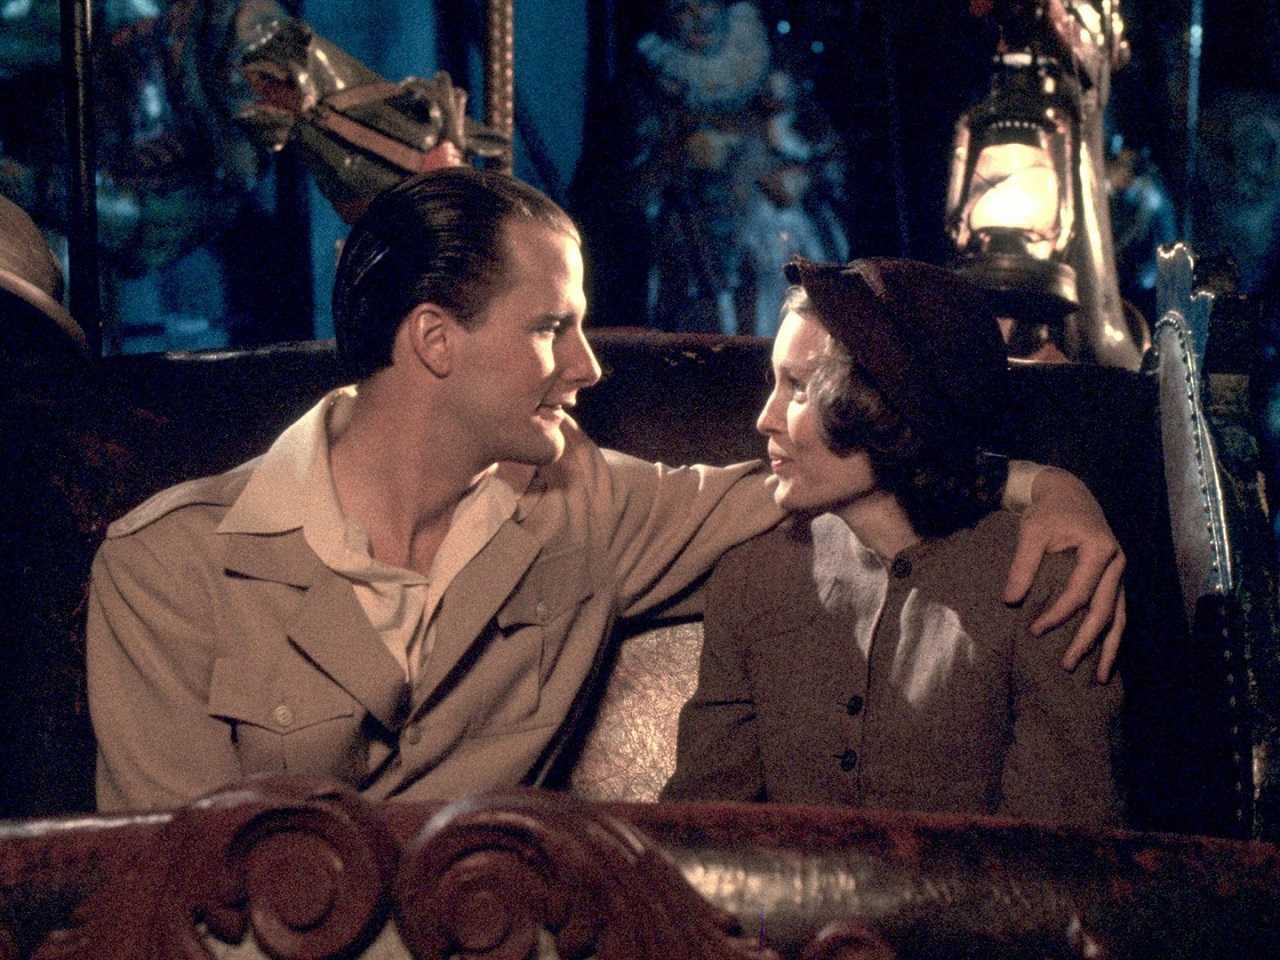 Fictional character Tom Baxter (Jeff Daniels) steps out of the screen to romance Cecilia (Mia Farrow) in The Purple Rose of Cairo (1985)